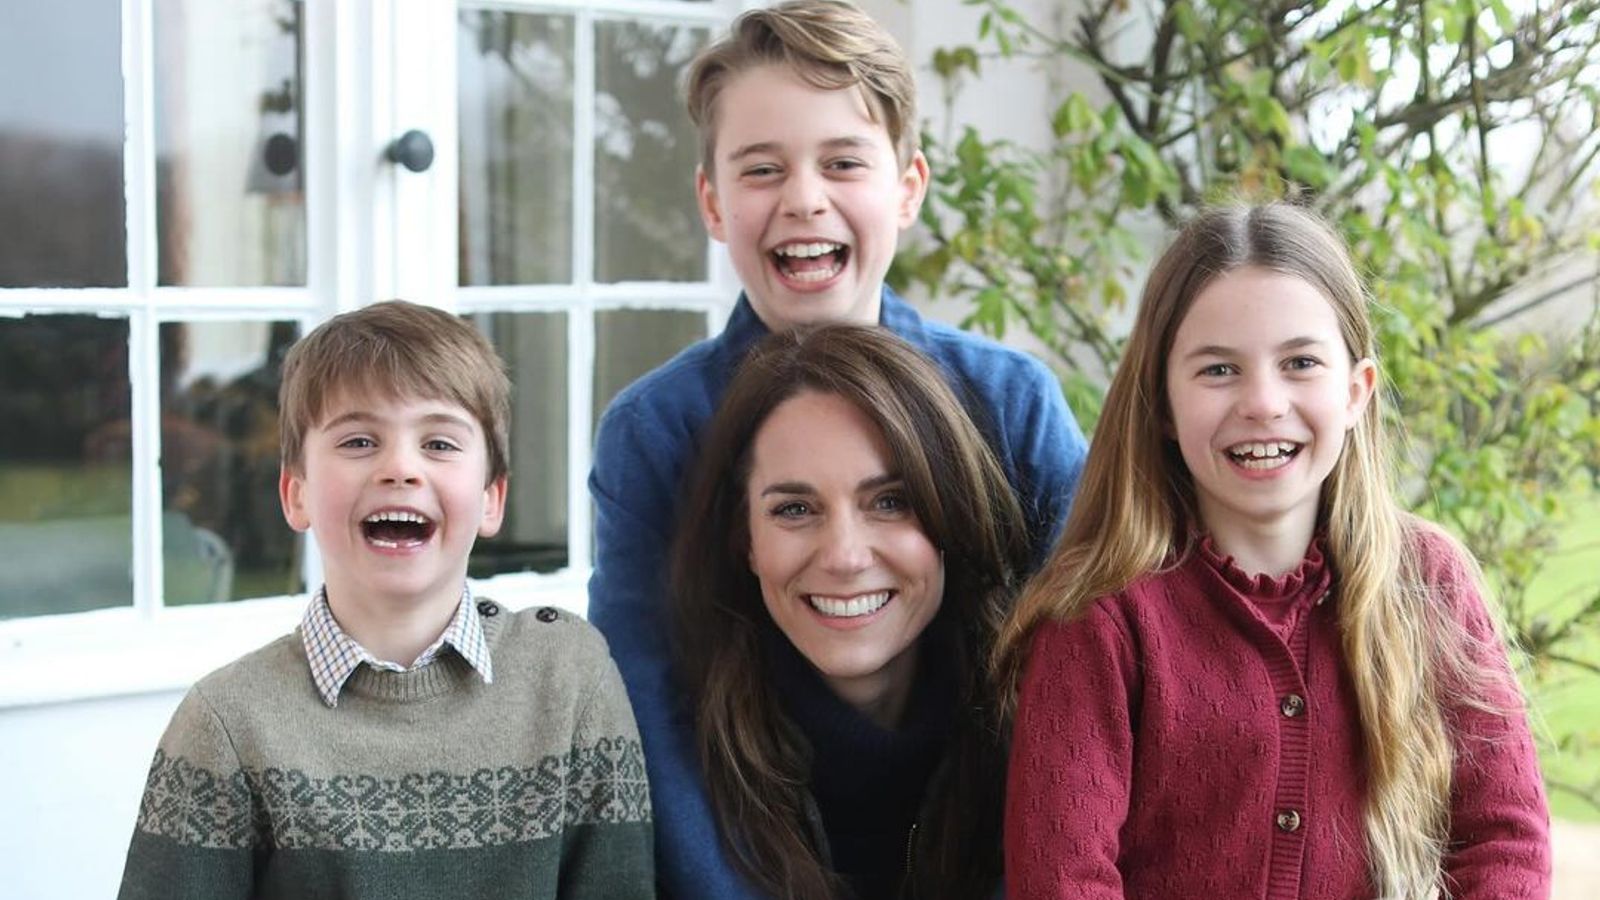 Kate, Princess of Wales, apologises 'for any confusion' after 'editing' Mother's Day photograph